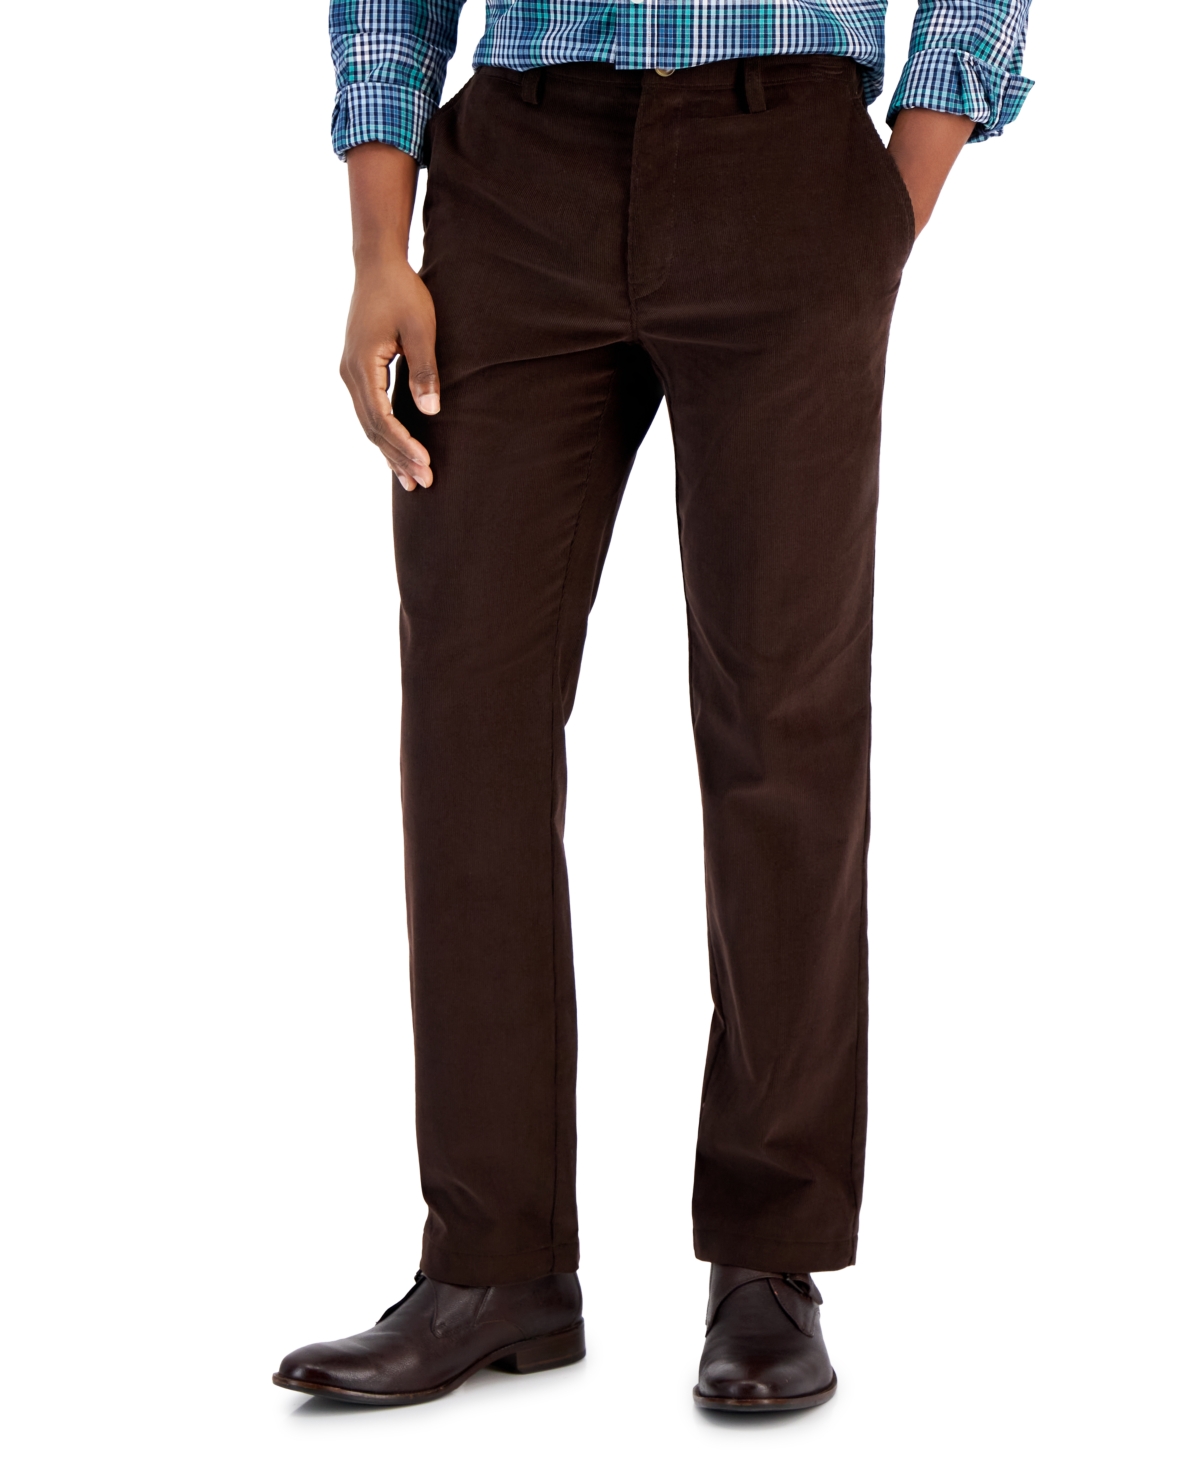 Club Room Men's Regular-fit Corduroy Pants, Created For Macy's In Sable